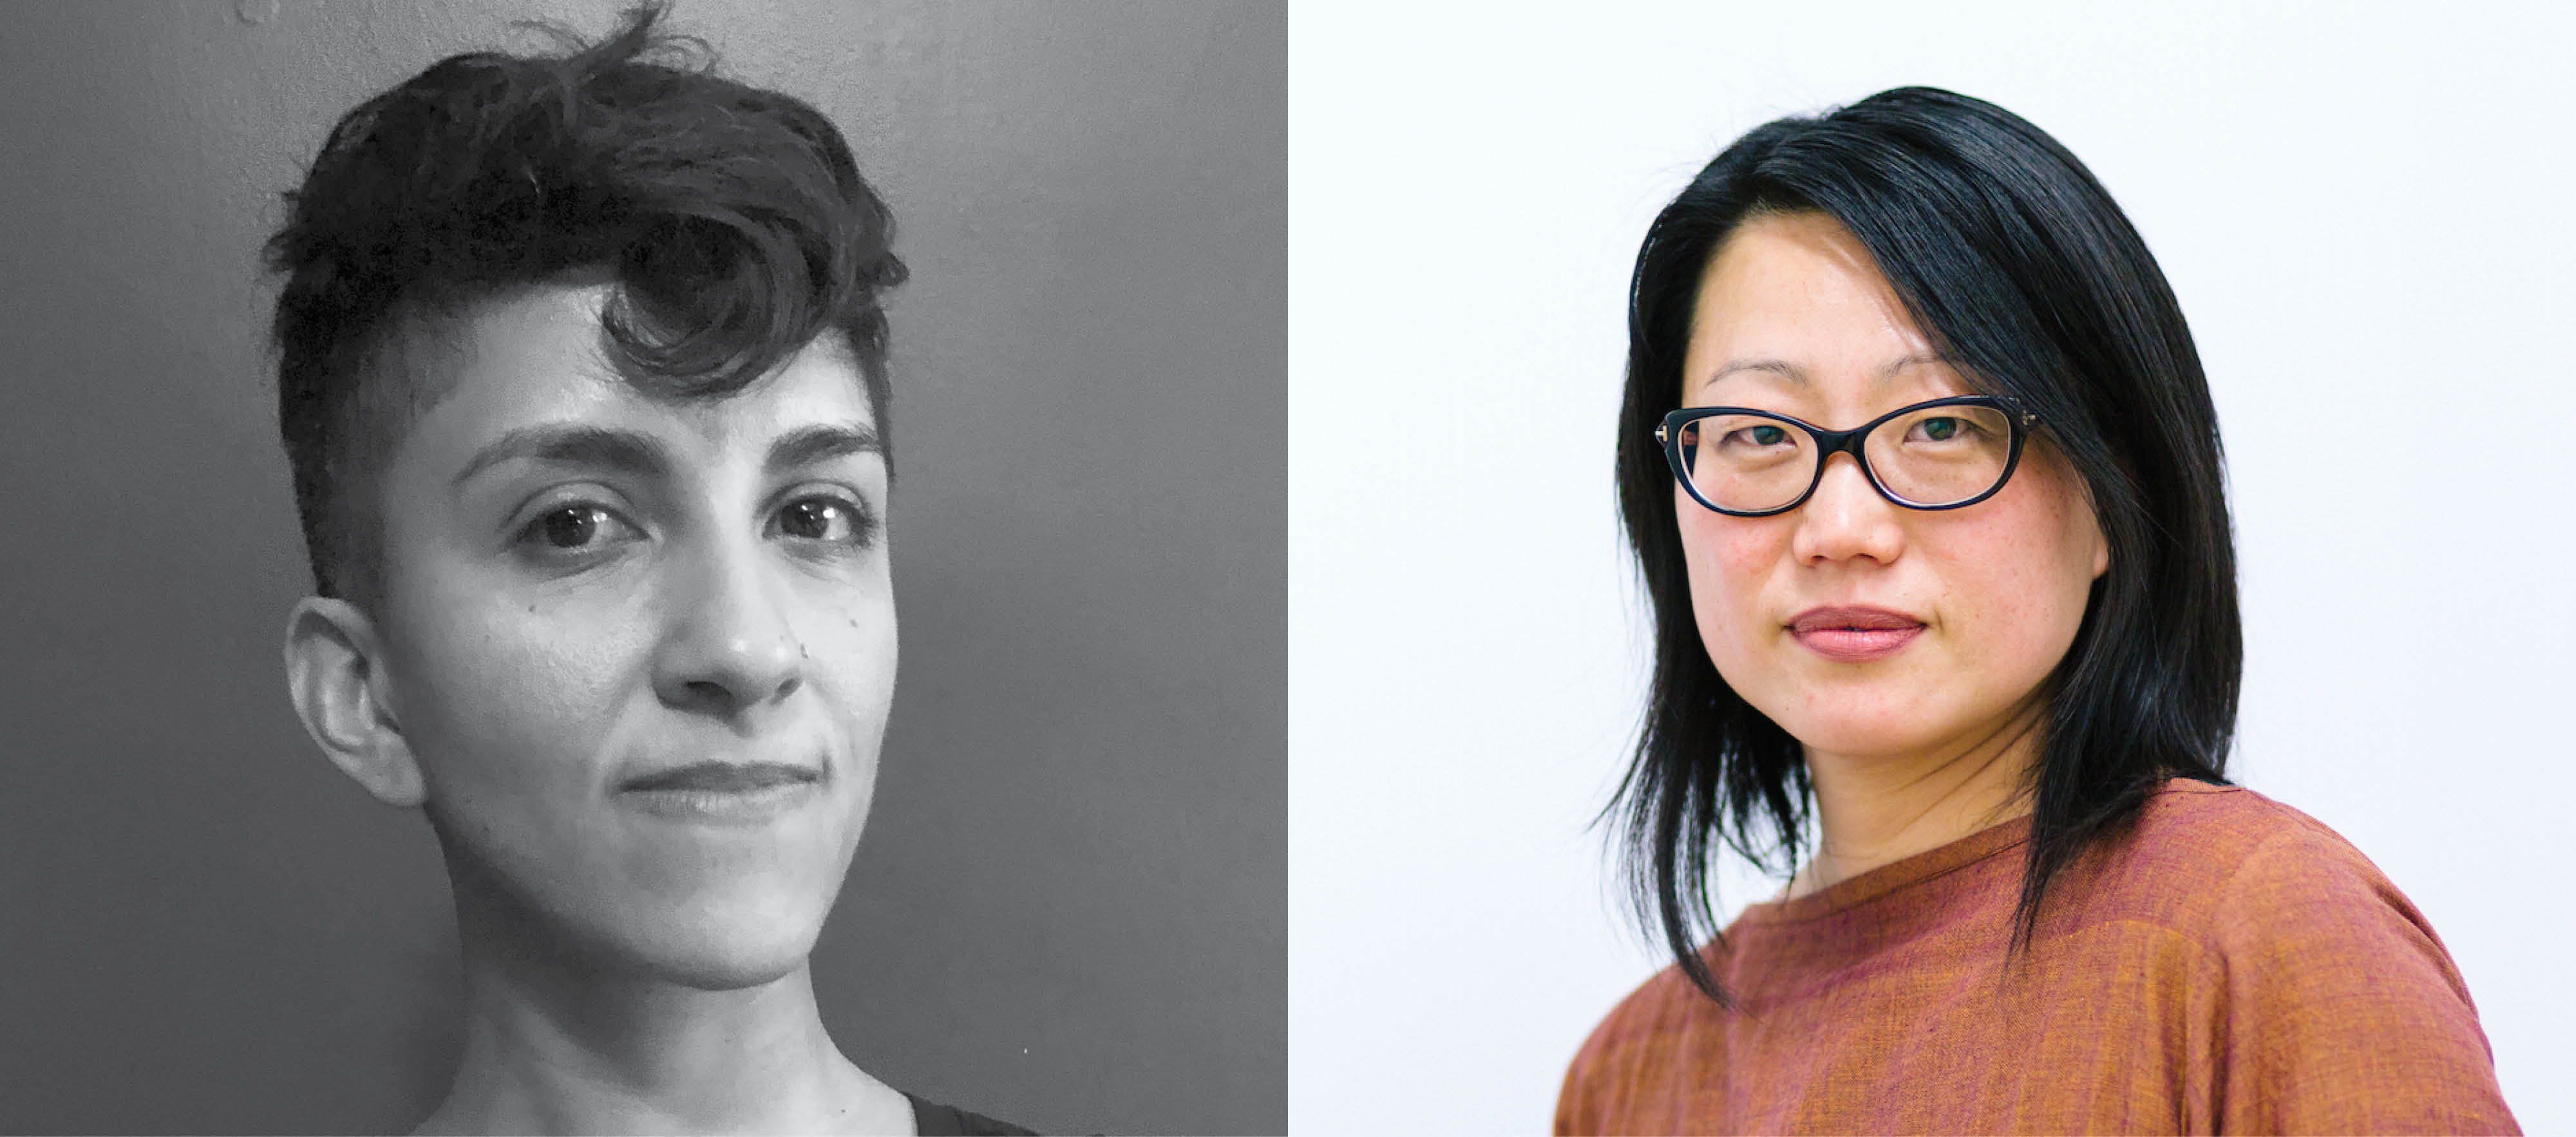 Collage of two headshots of the speakers of this talk. On the left is a black-and-white photograph of Sa’dia Rehman. On the right is a photograph of Jean Shin against a white background.